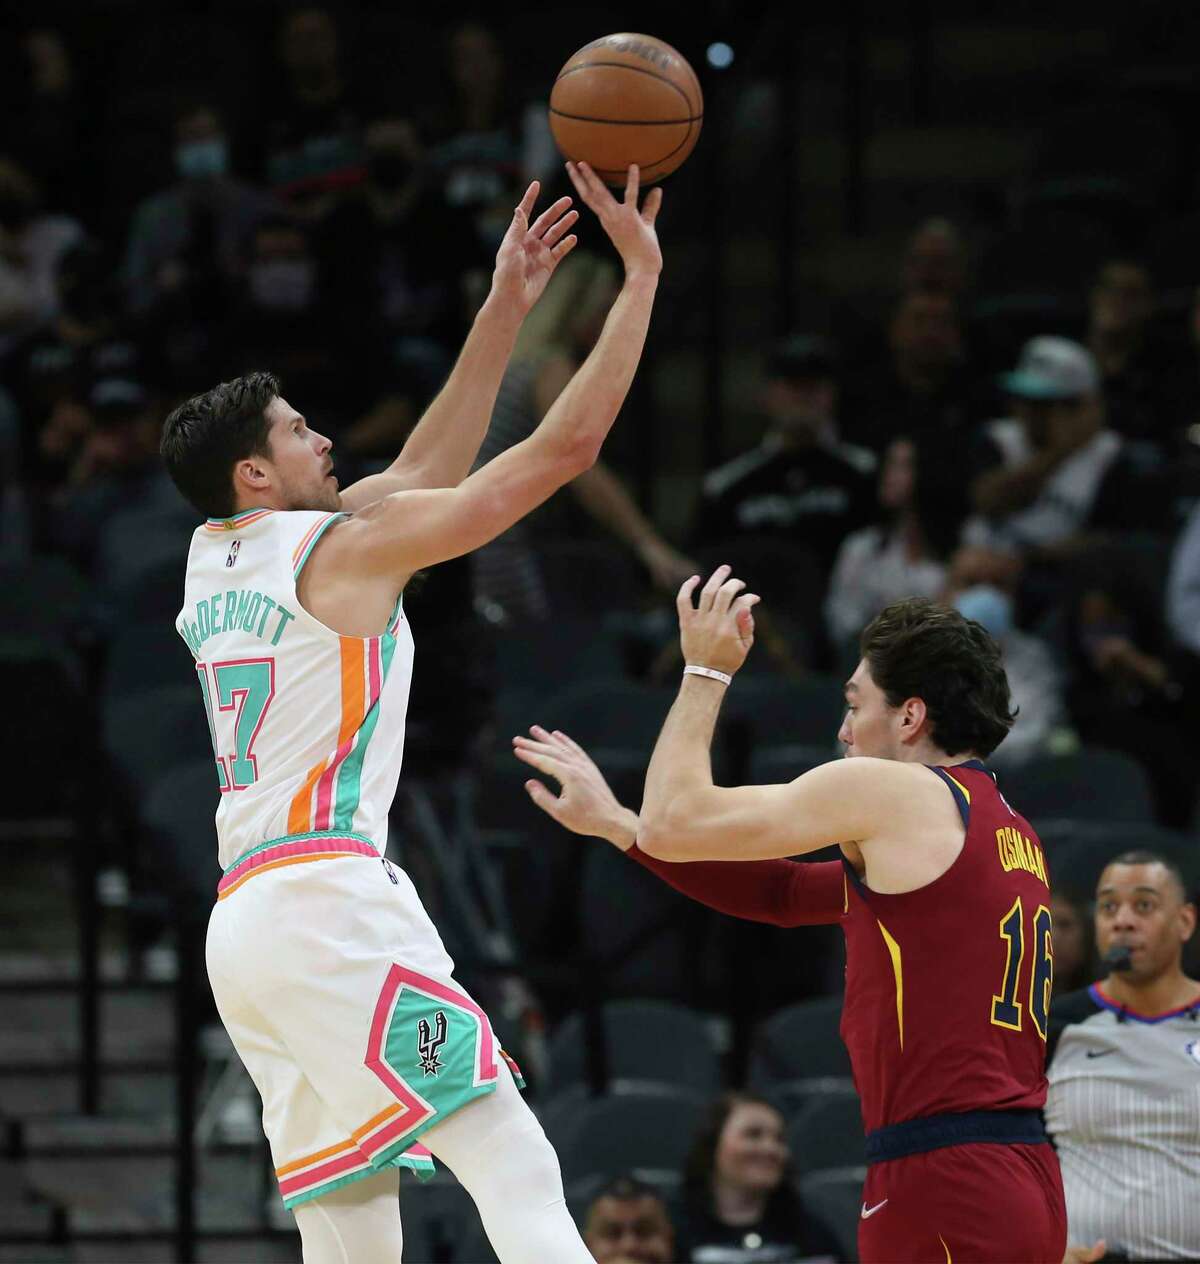 Spurs' Doug McDermott (17) hoists a three against Cleveland Cavaliers' Cedi Osman (16) in the first half at the AT&T Center on Friday, Jan. 14, 2022.